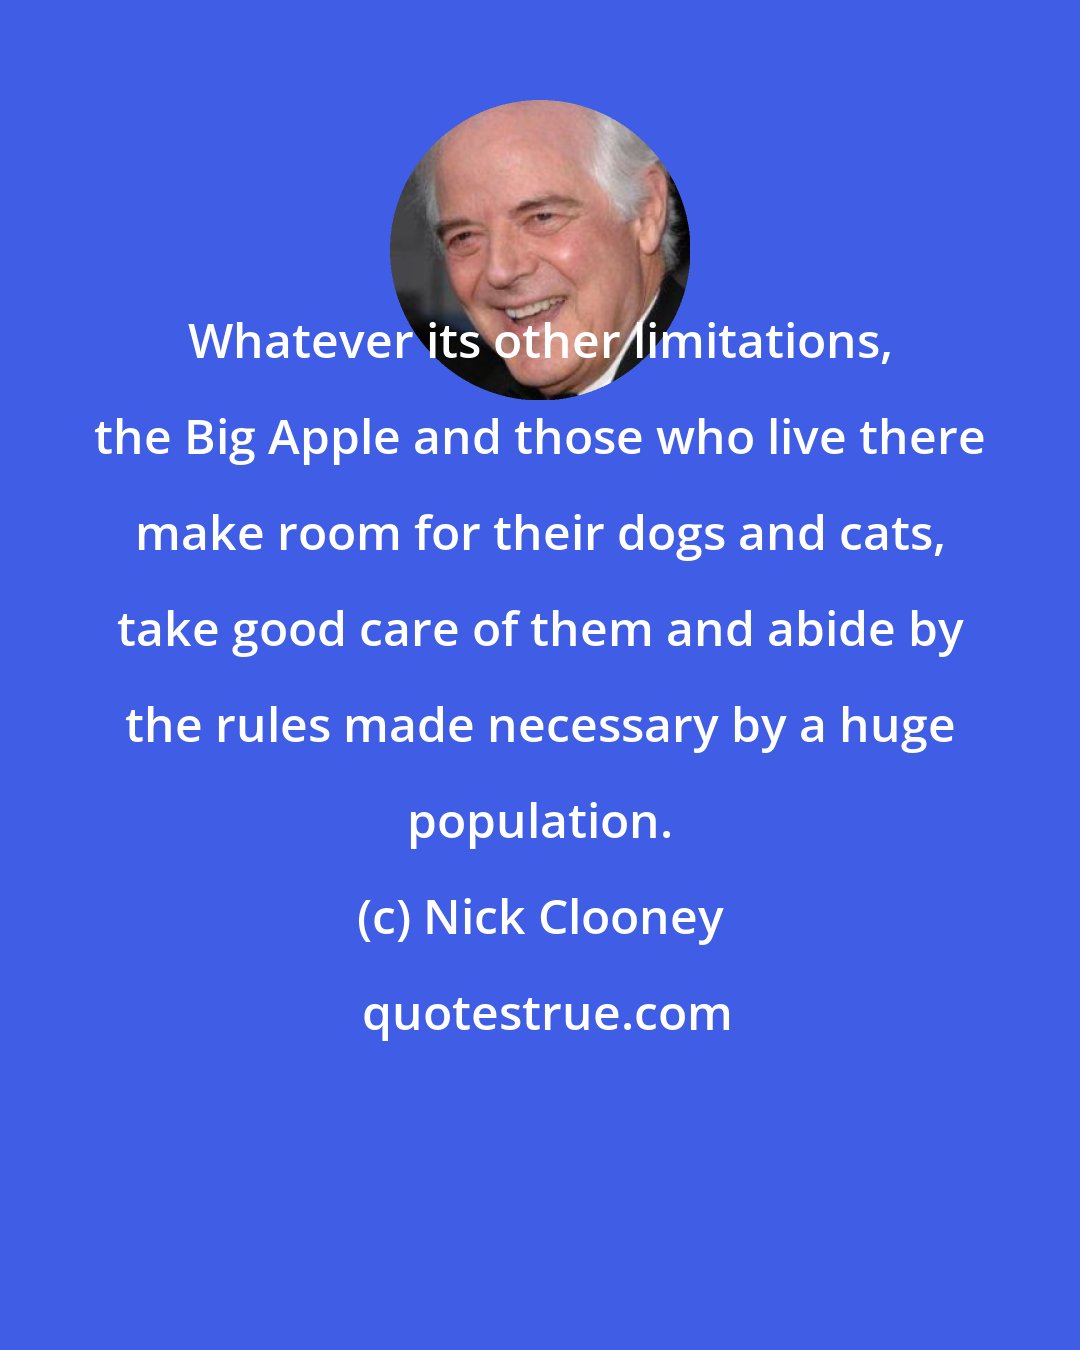 Nick Clooney: Whatever its other limitations, the Big Apple and those who live there make room for their dogs and cats, take good care of them and abide by the rules made necessary by a huge population.